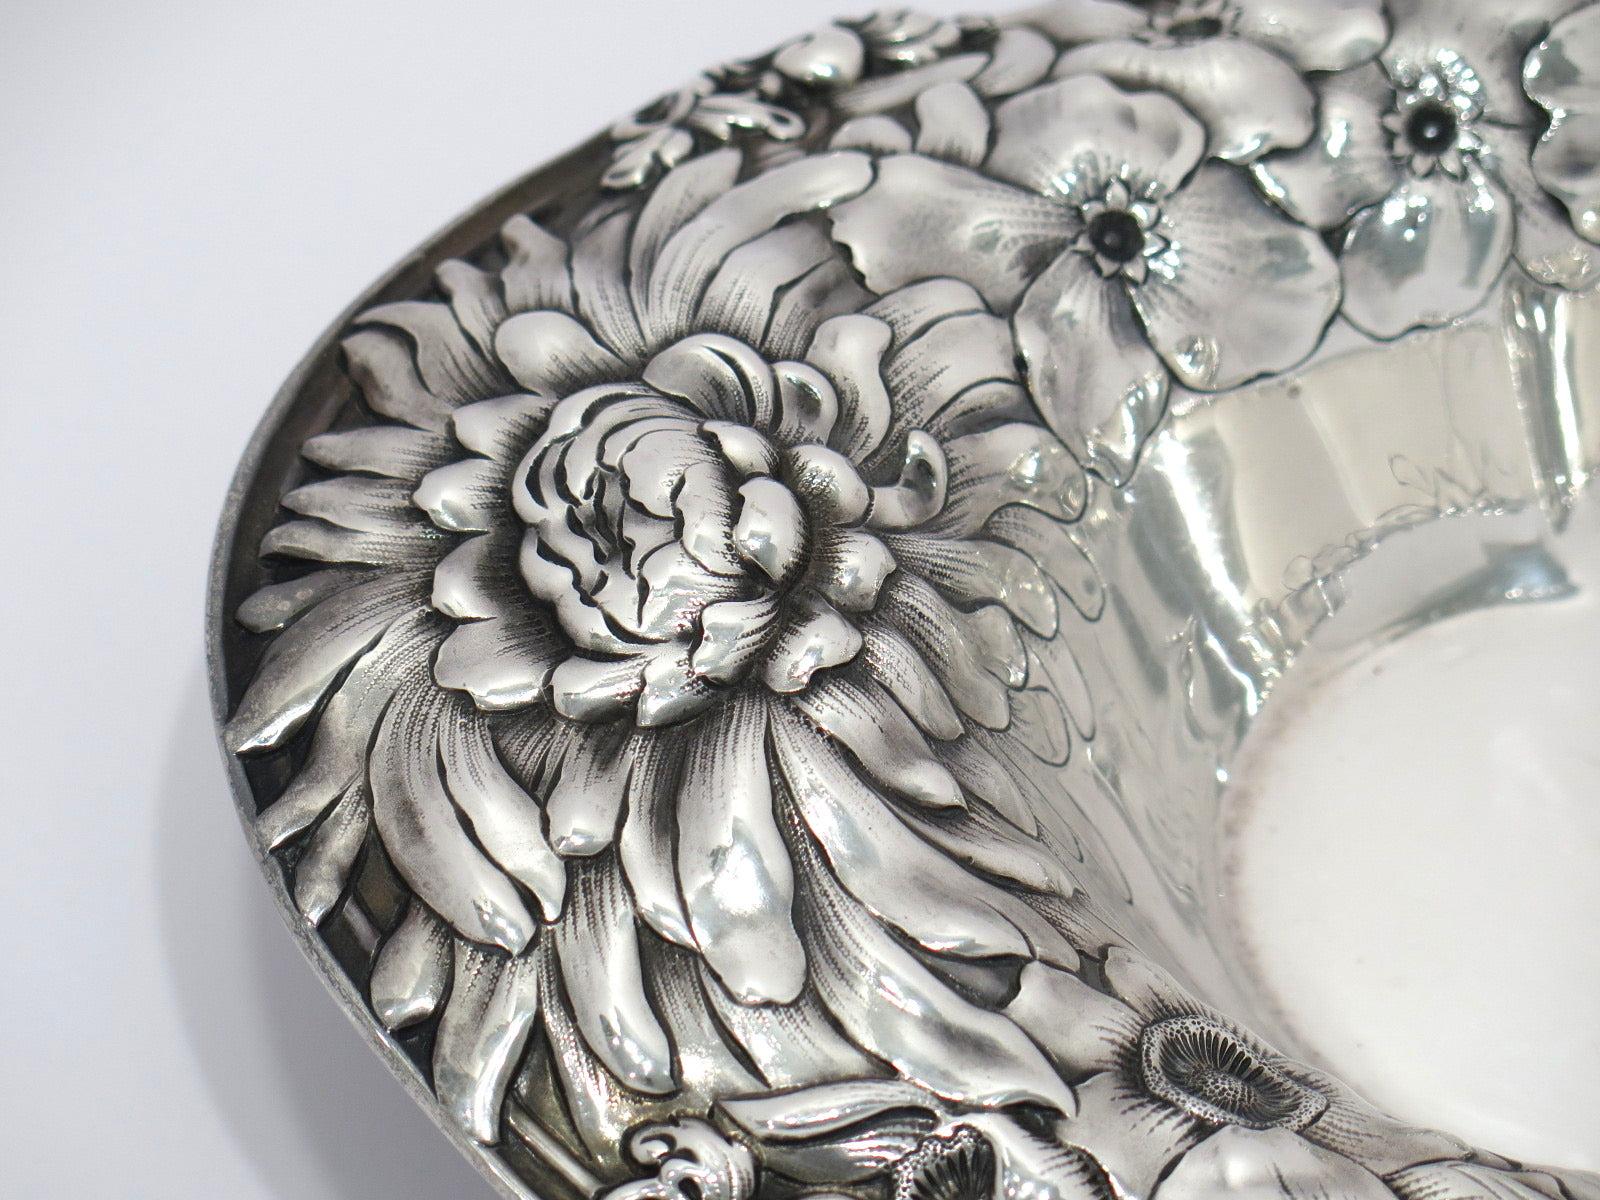 American Sterling Silver Gorham Antique 1904 Peony Oval Serving Bowl / Centerpiece